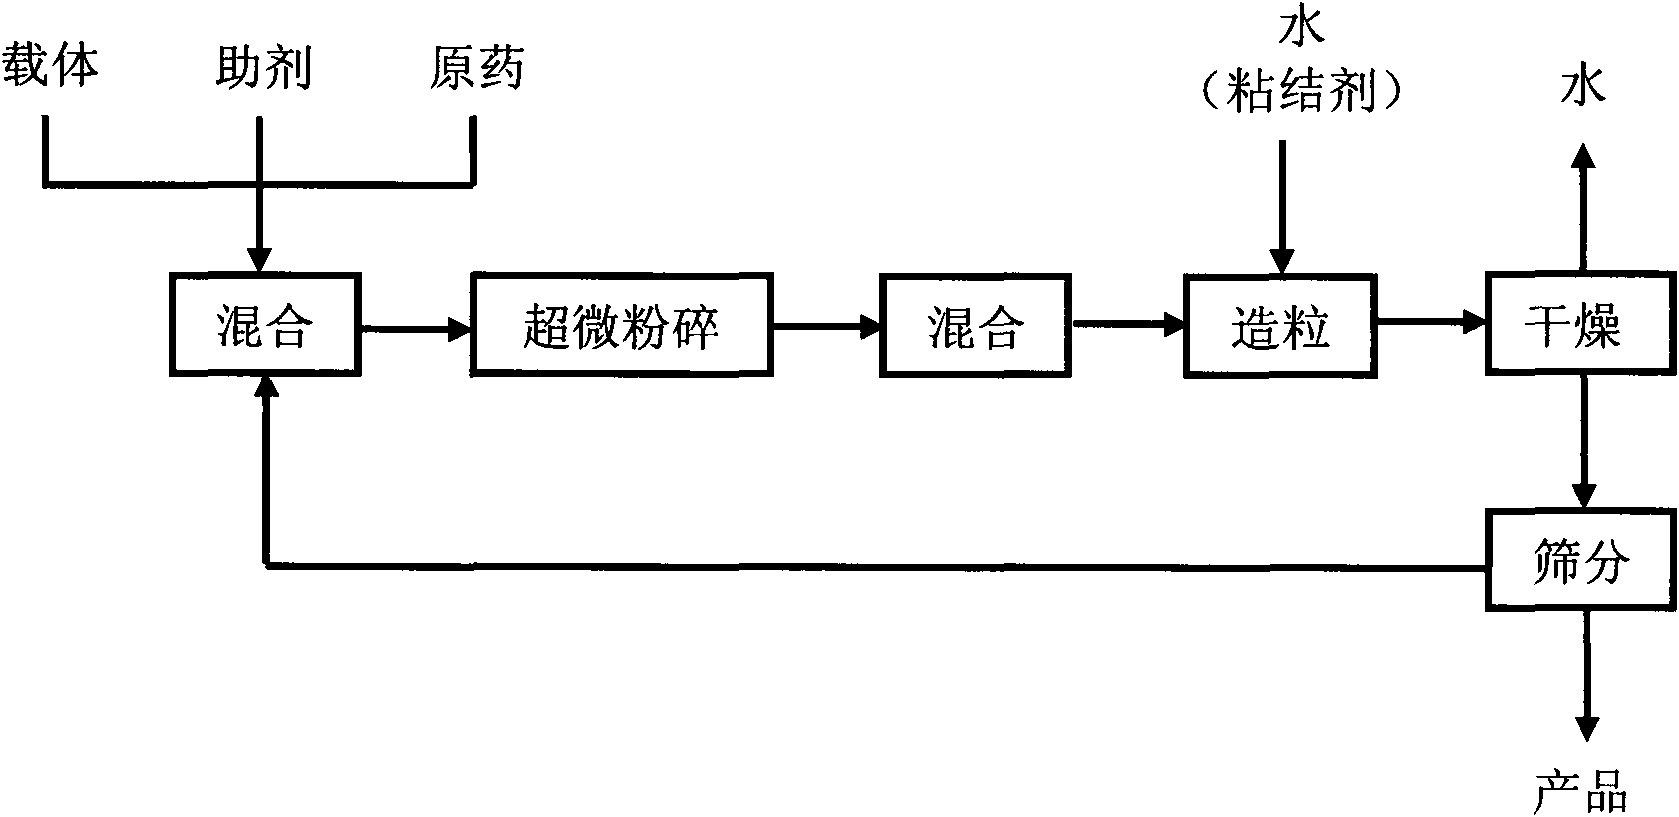 Uniconazole water dispersible granules and preparation method thereof